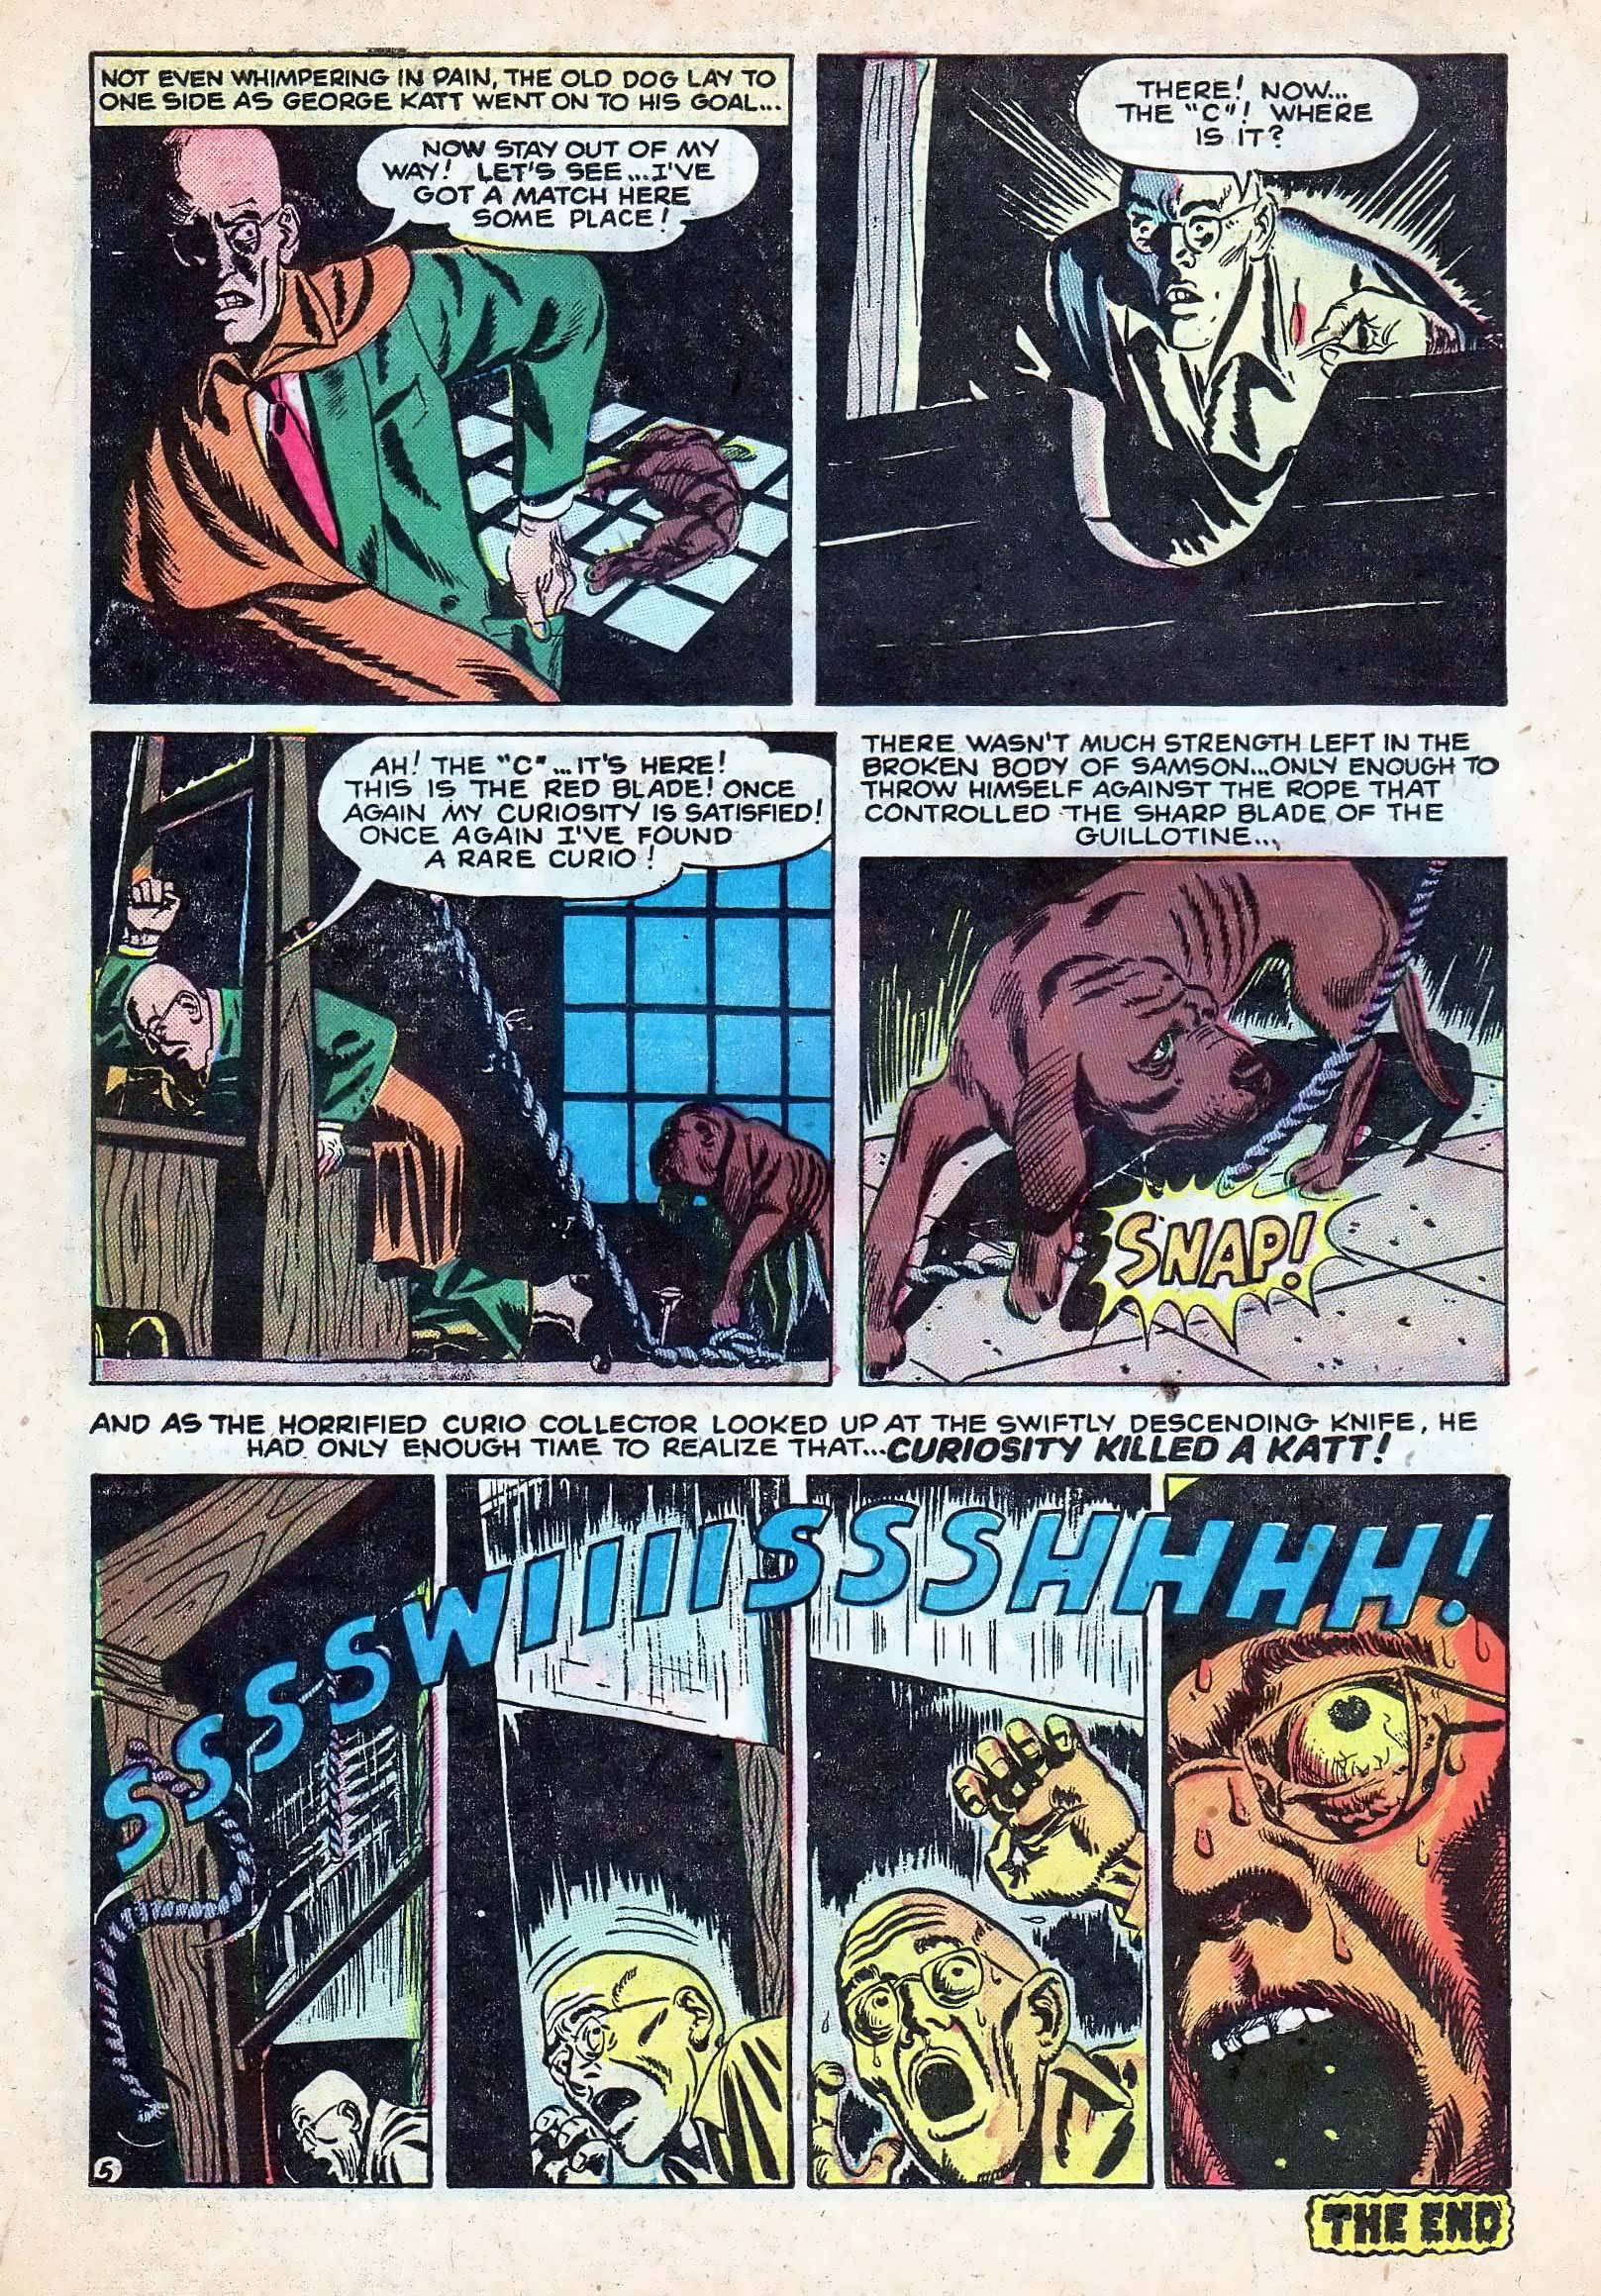 Marvel Tales (1949) 108 Page 13